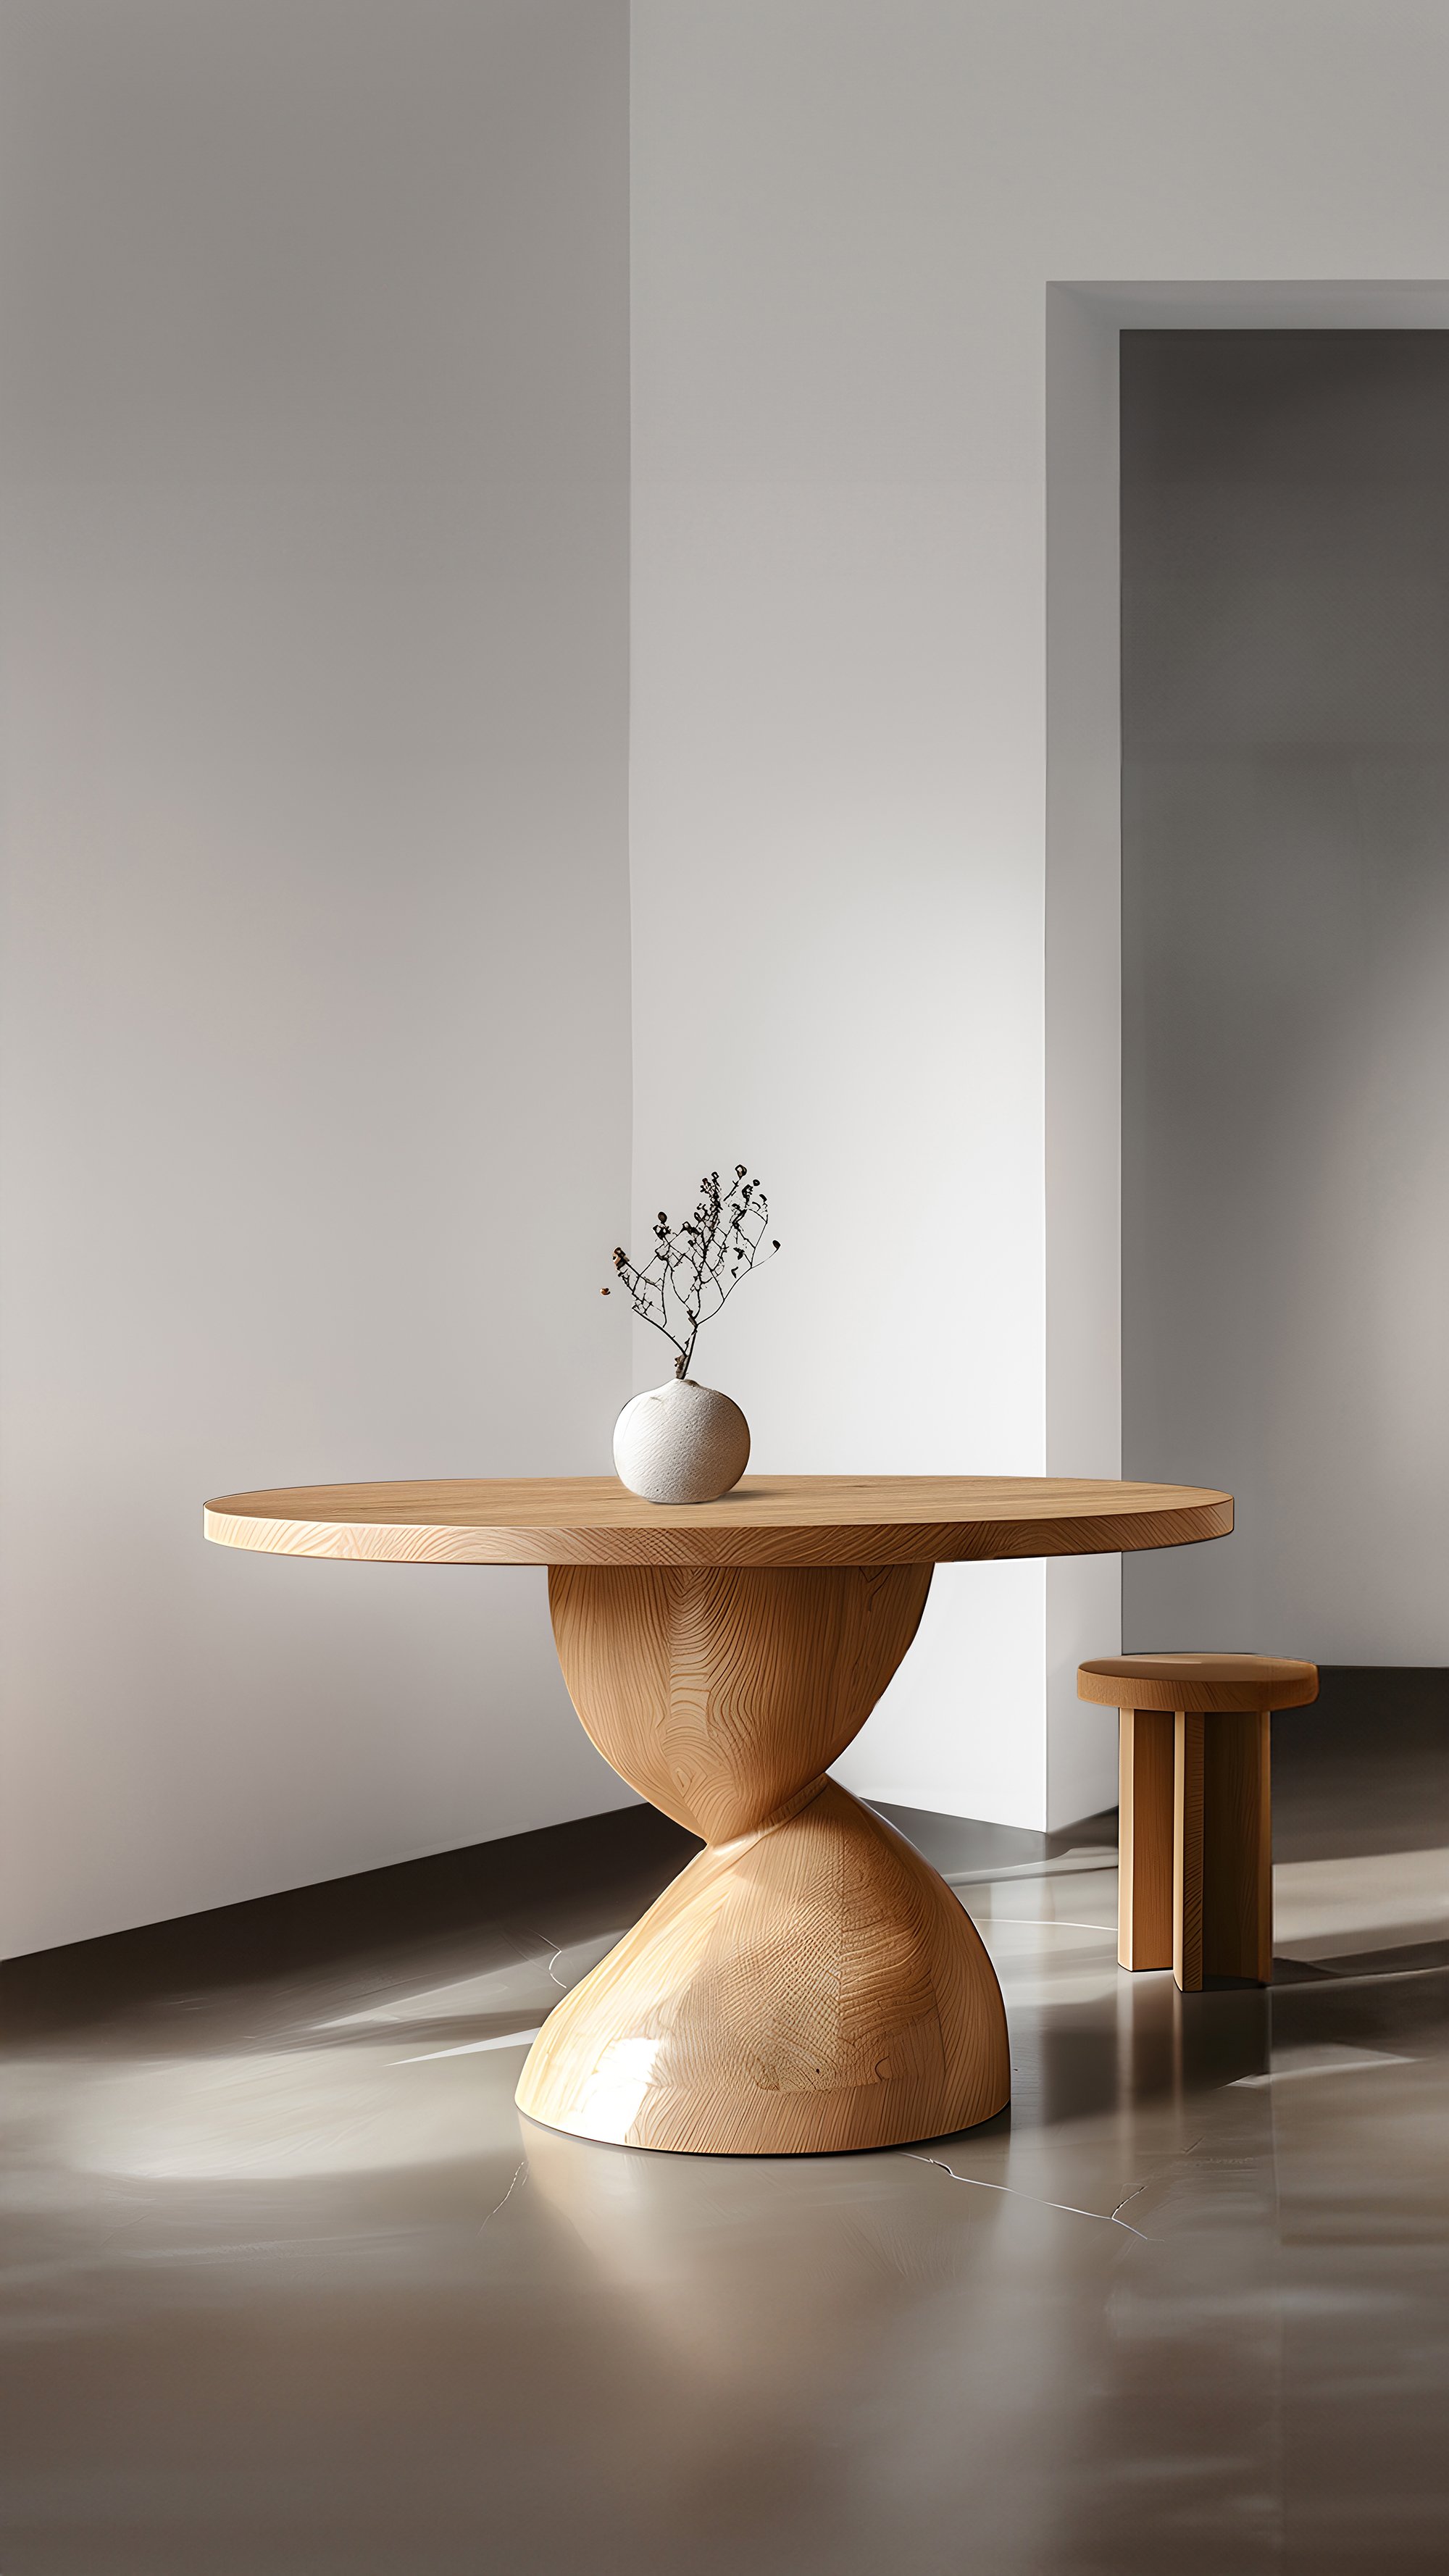 Dining Tables, Socle's Solid Wood No18, Mealtime Masterpieces by NONO - 6.jpg